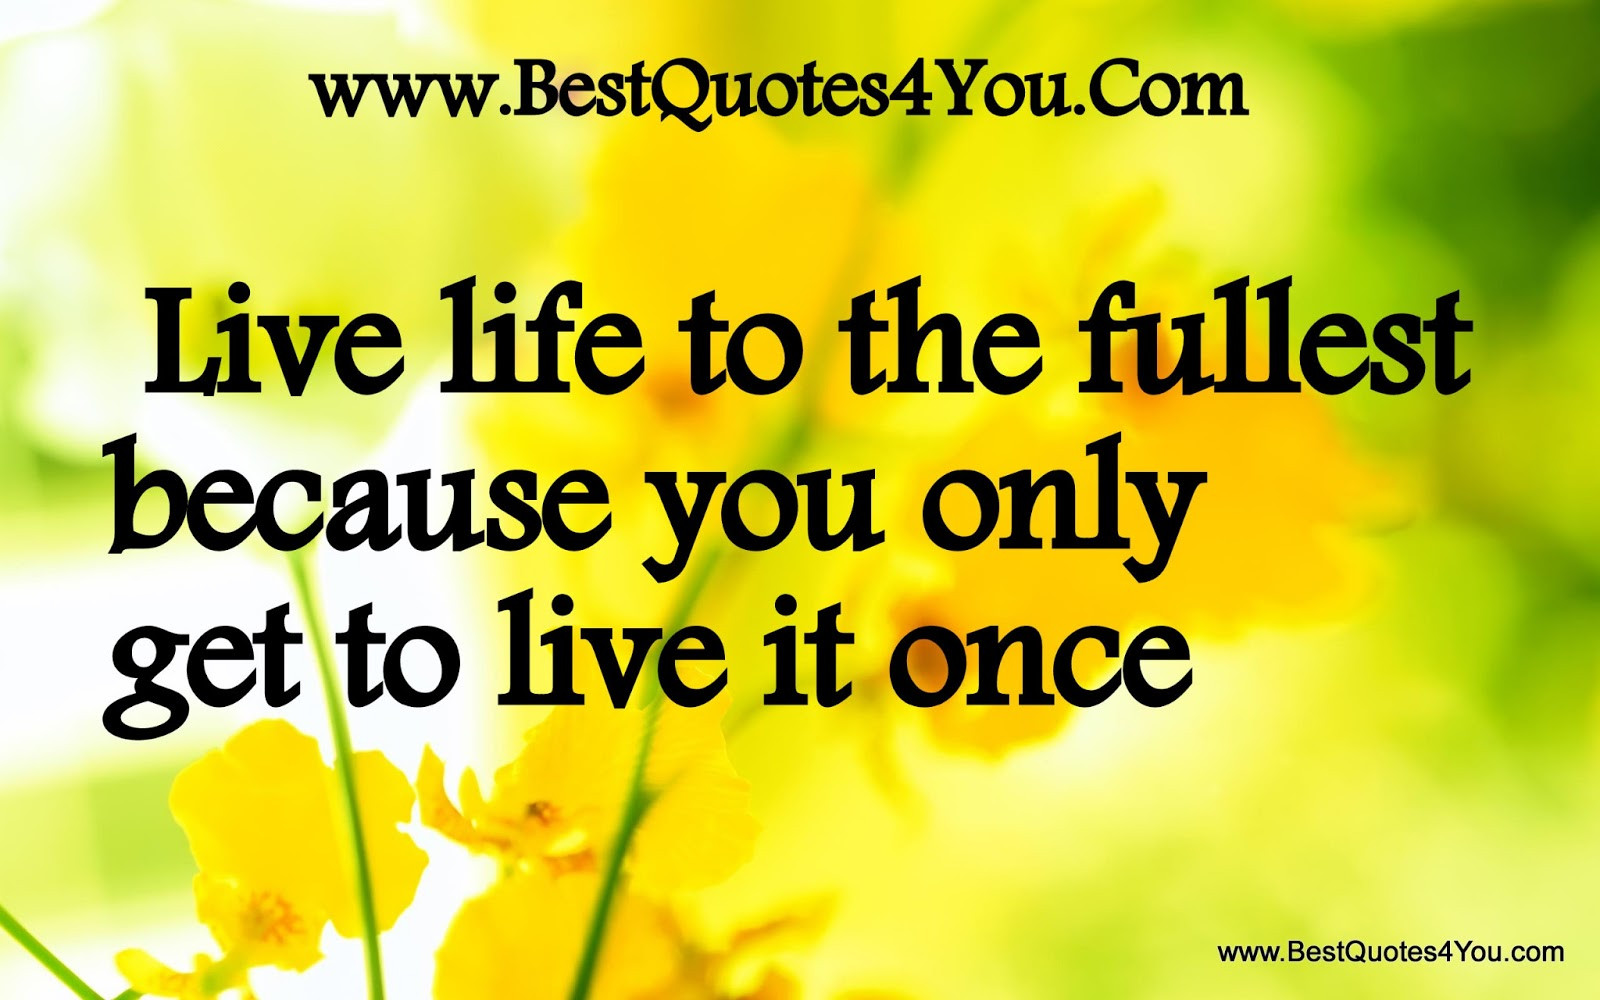 Quote On Living Life To The Fullest
 The Fullest Life Quotes To Live By QuotesGram